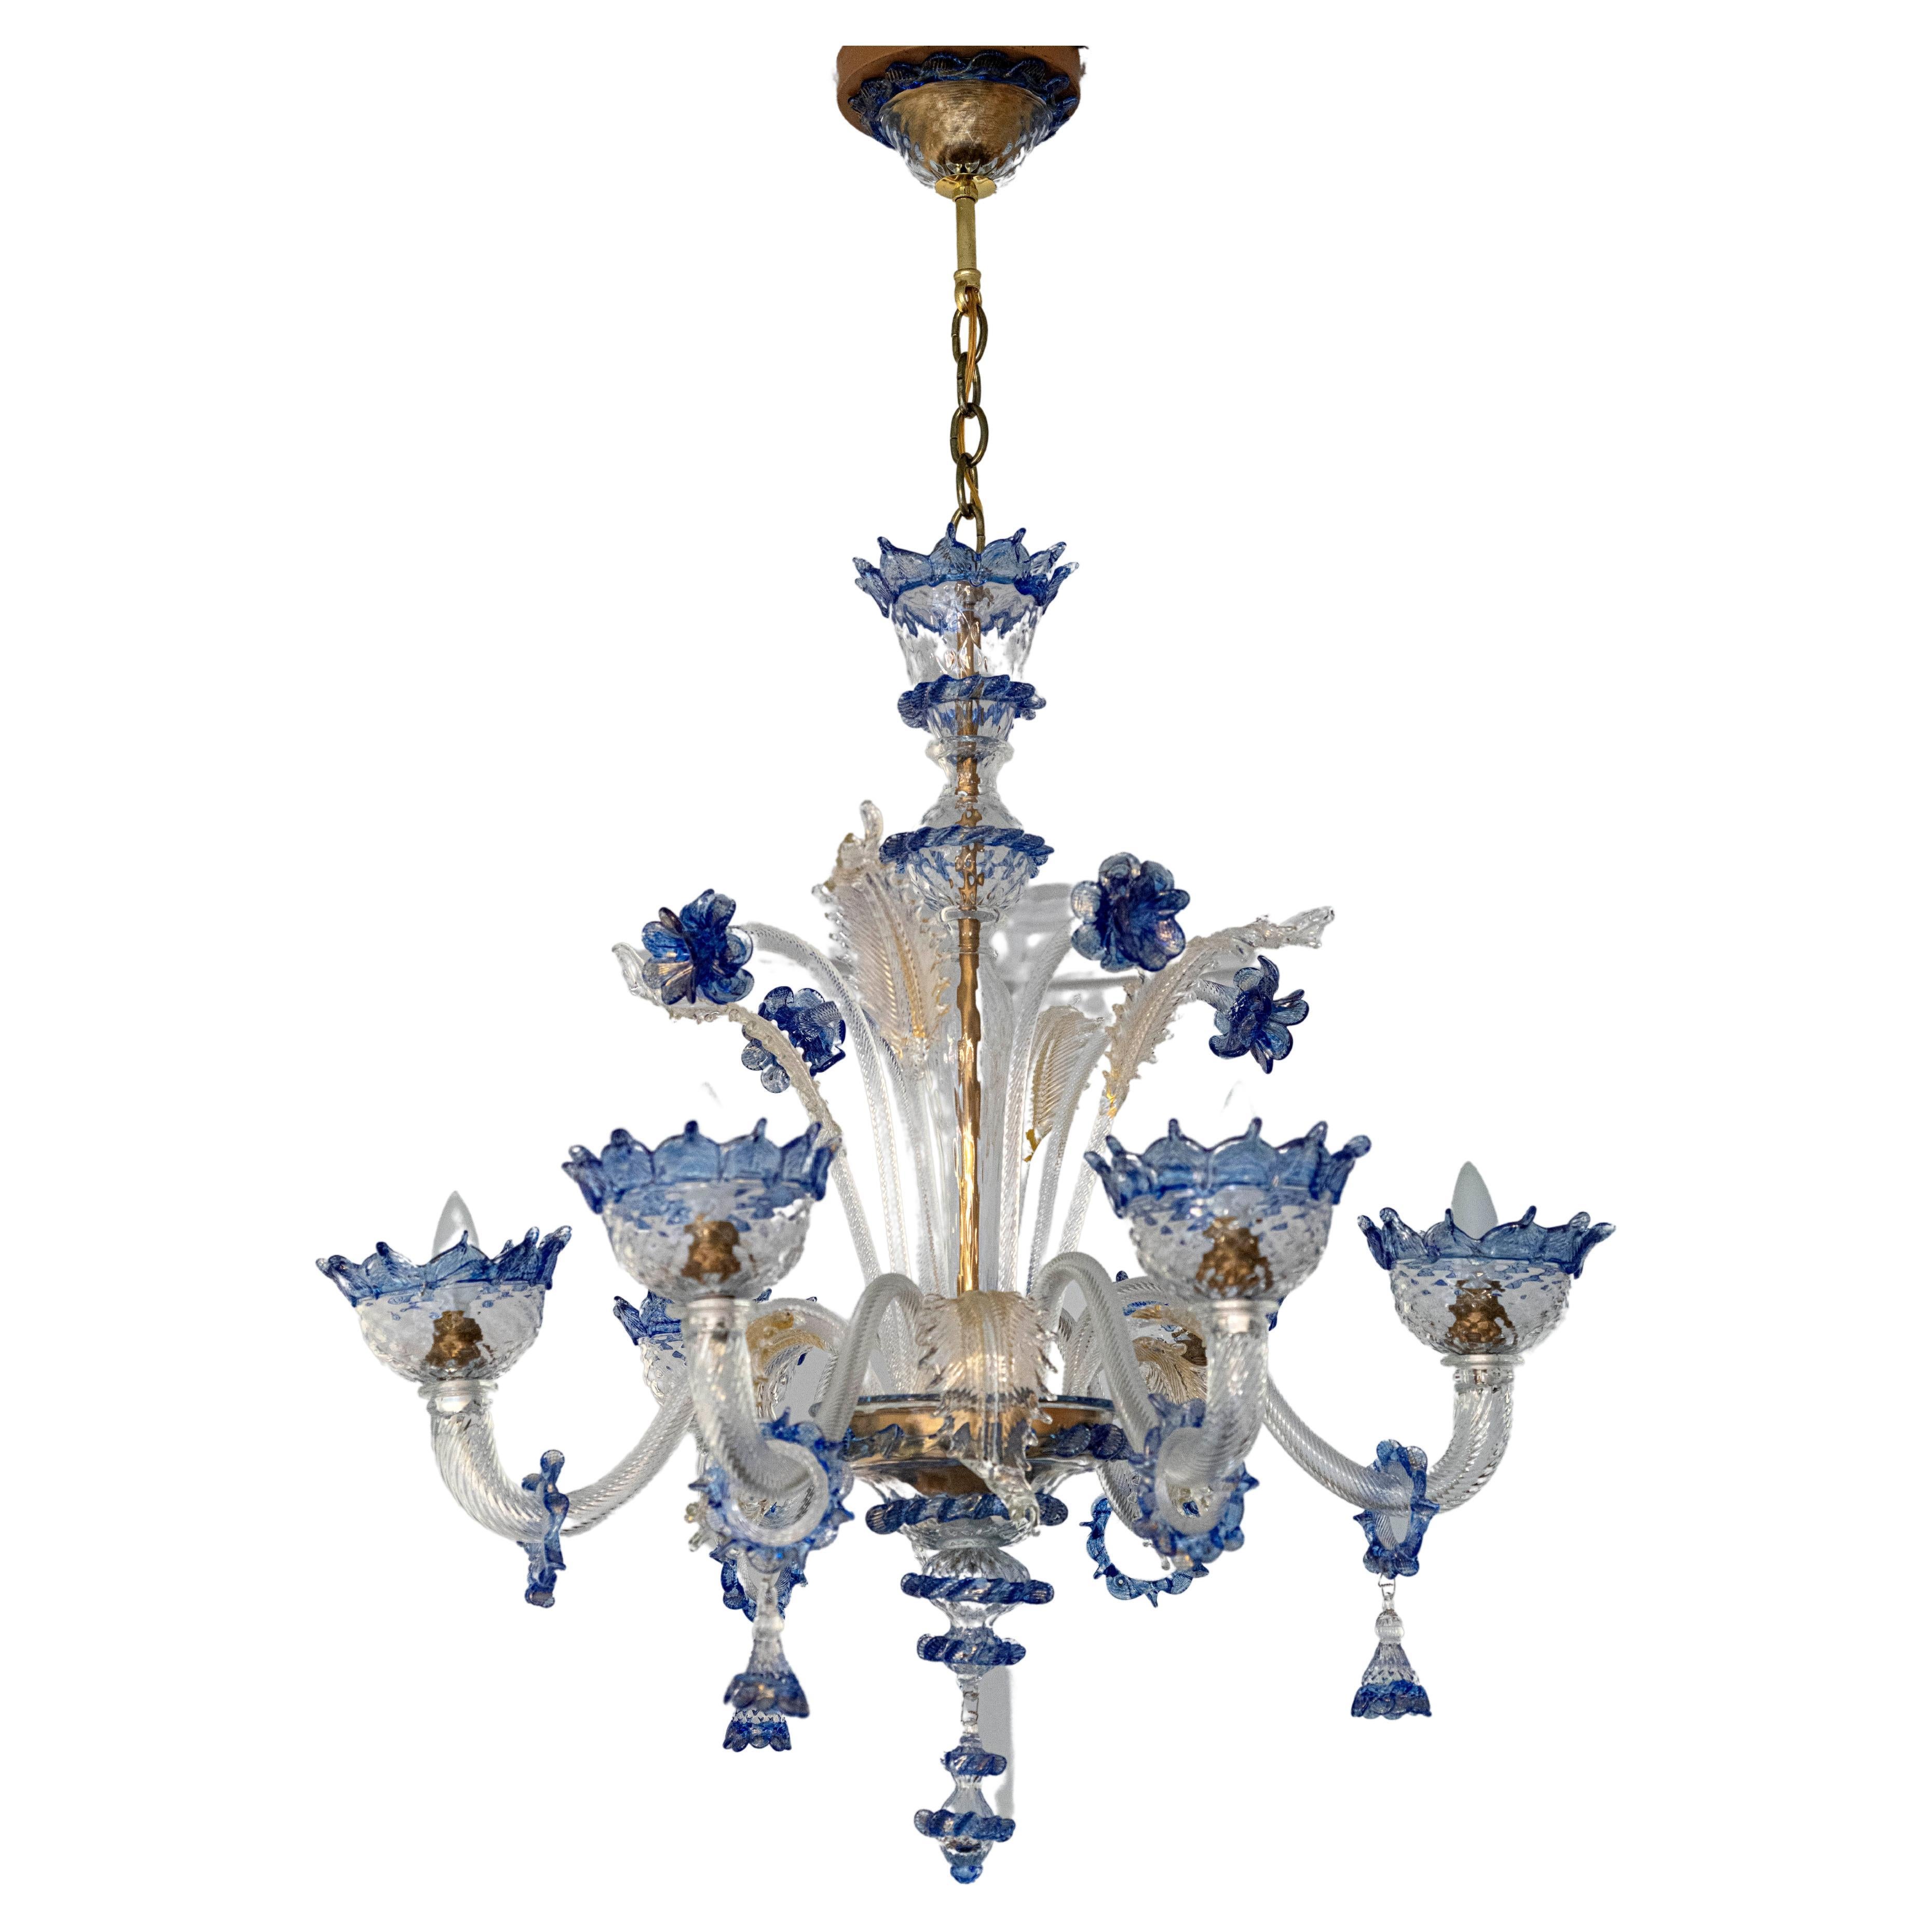 Wonderful vintage 6 light Murano chandelier. The chandelier is large at 31 inches in diameter. Beautifully handcrafted in Murano with wonderful textured clear and blue glass with subtle hints of gold. 


 